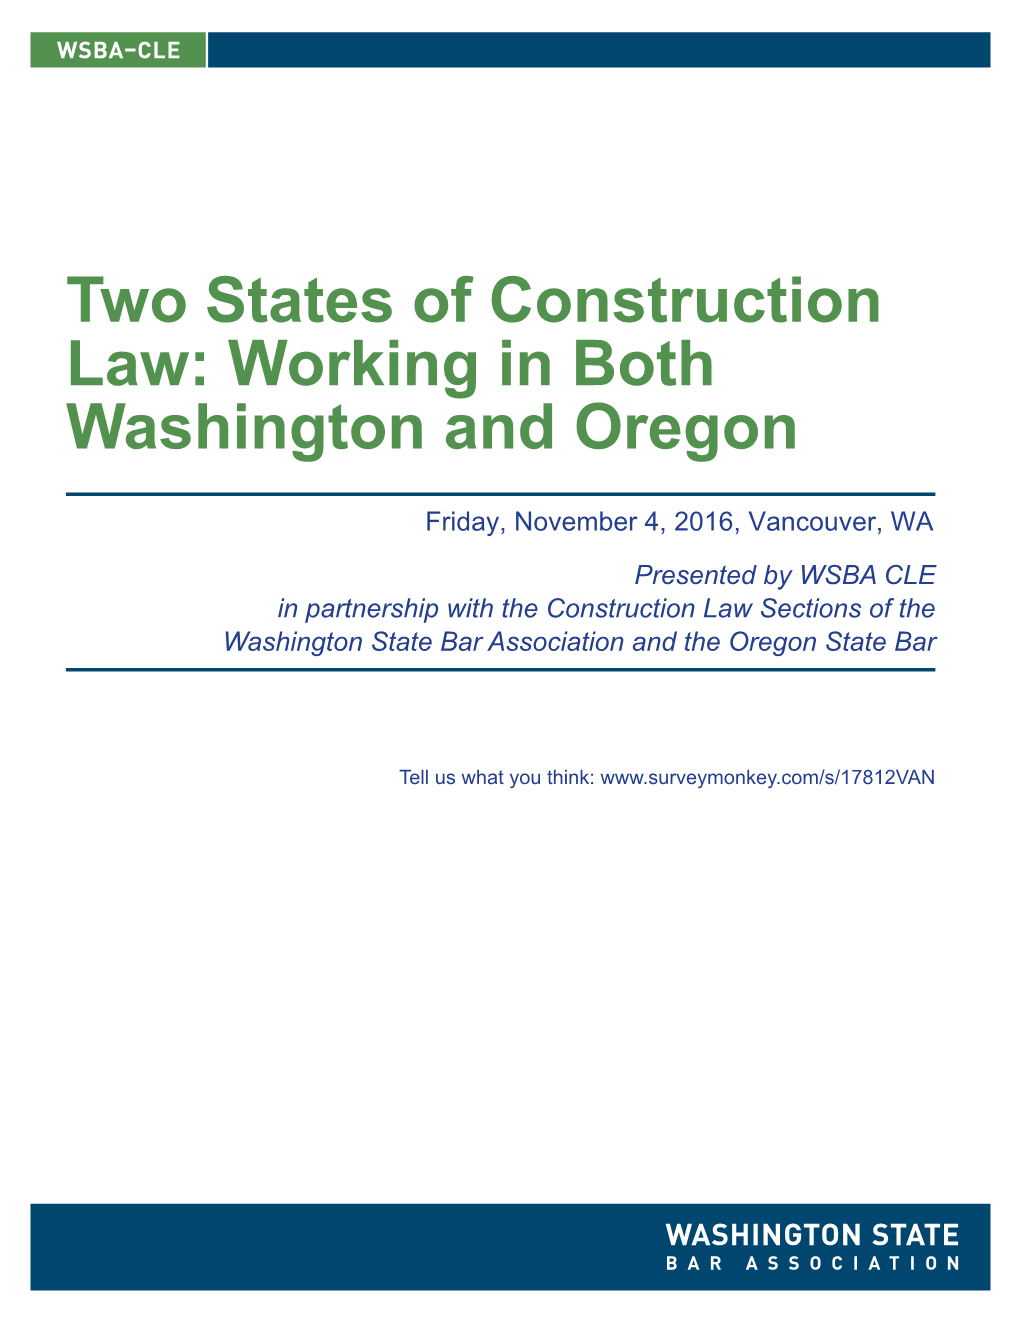 Two States of Construction Law: Working in Both Washington and Oregon